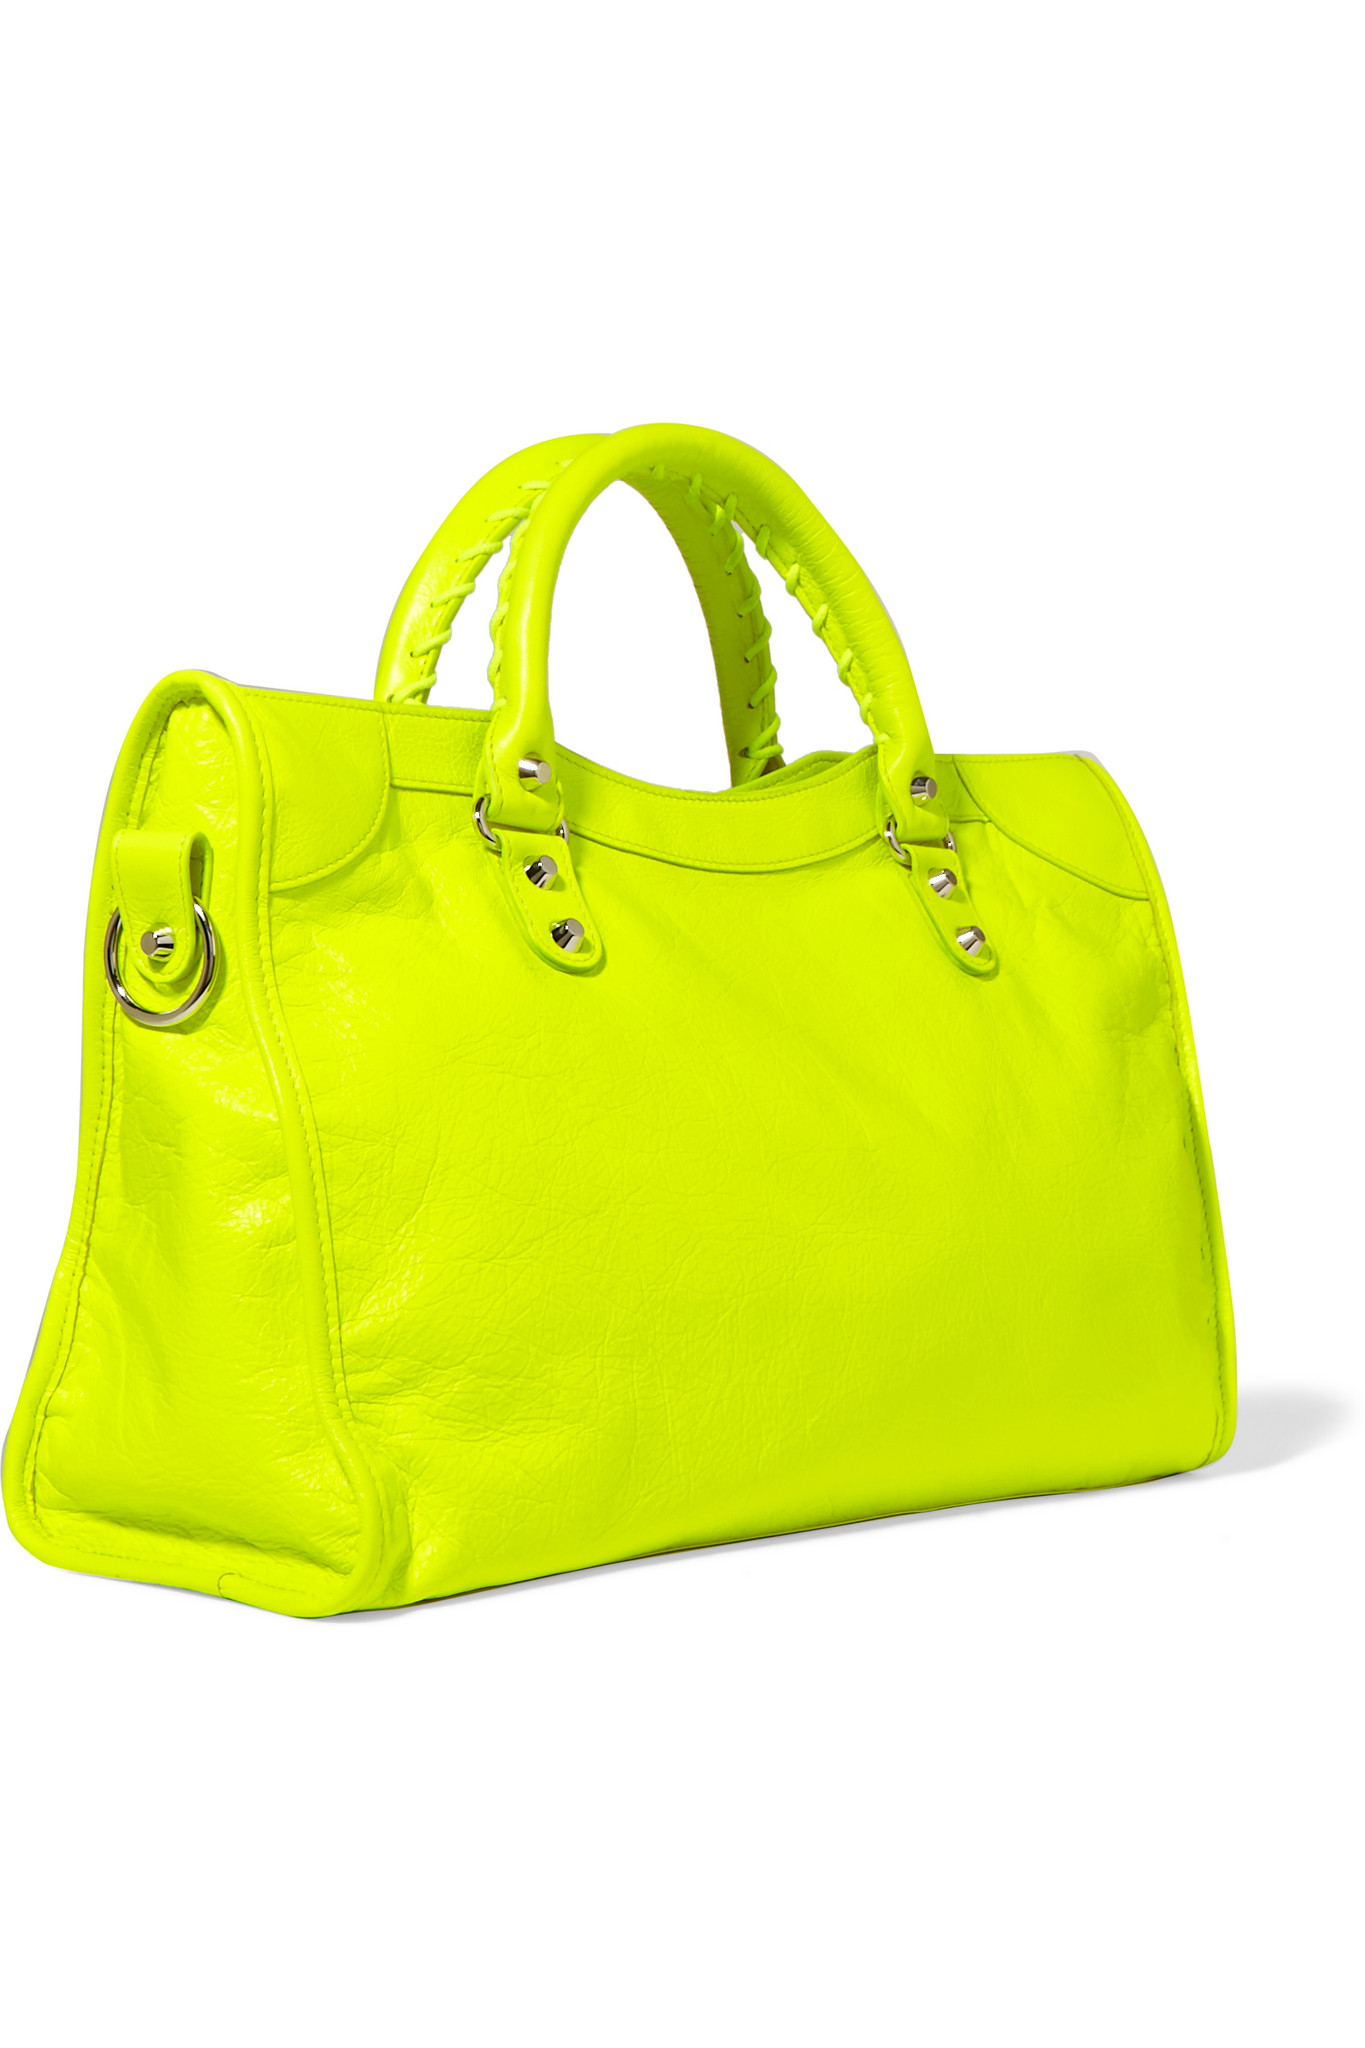 Balenciaga City Classic Neon Leather Shoulder Bag in Yellow | Lyst